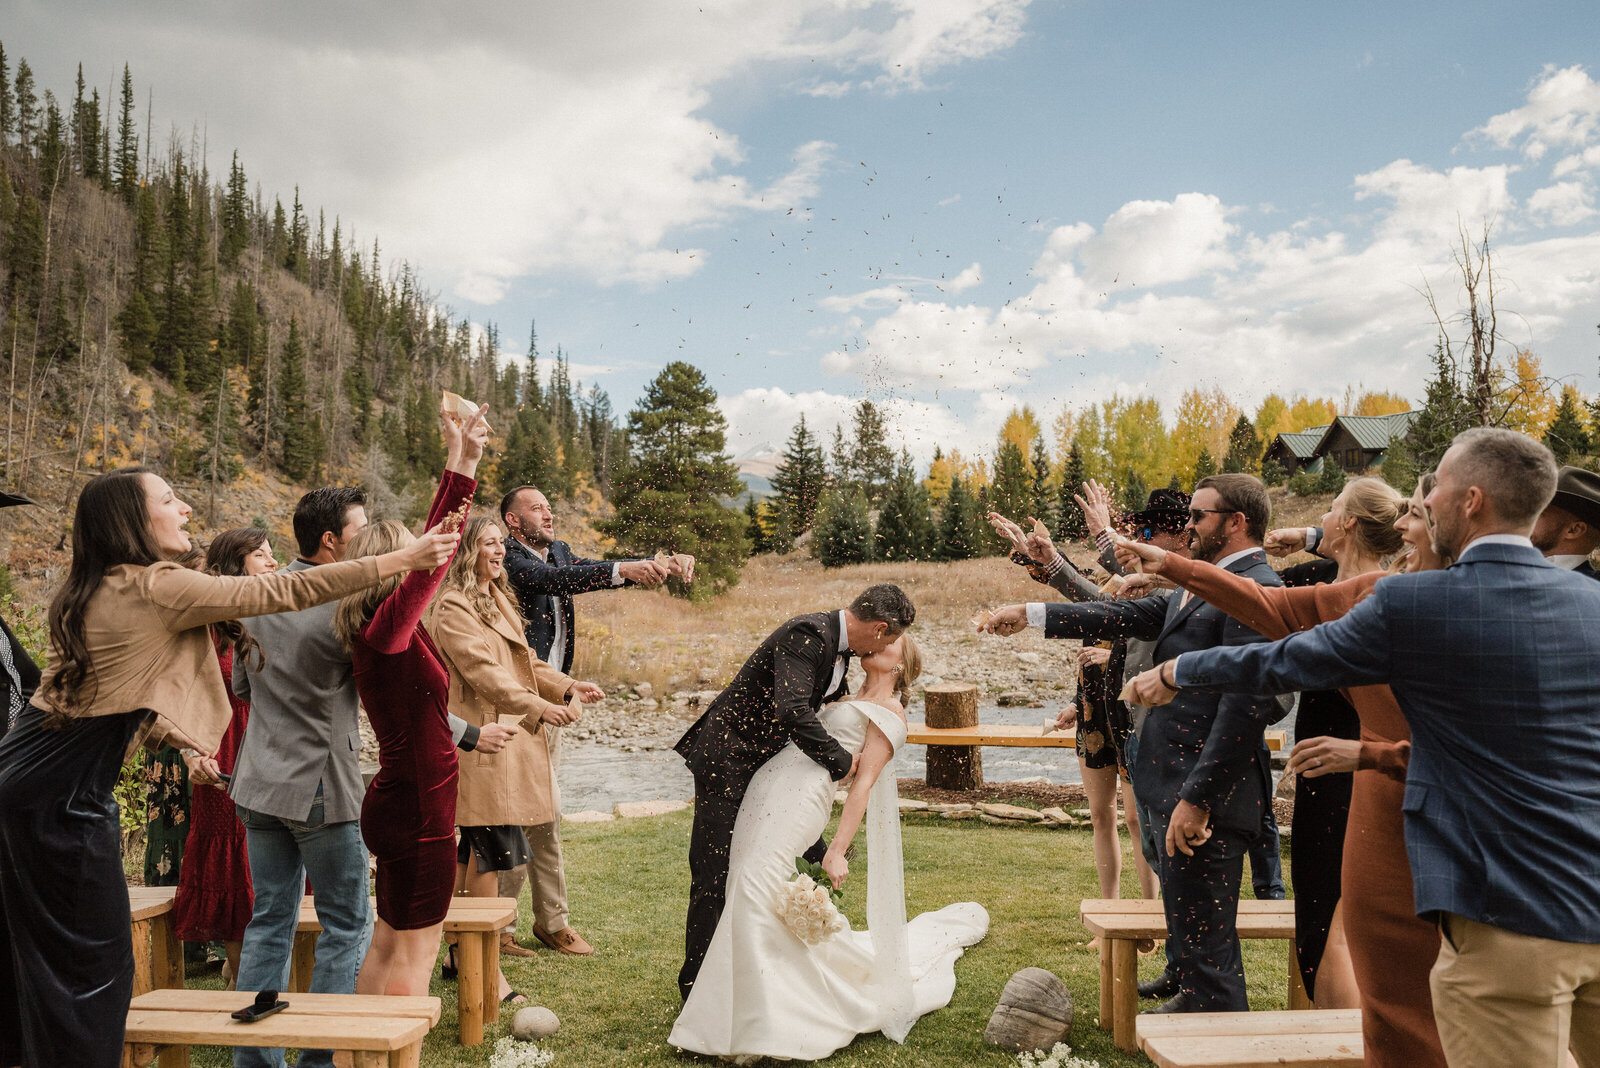 Bride and groom share their first kiss at their micro intimate elopement wedding in Breckenridge, Colorado